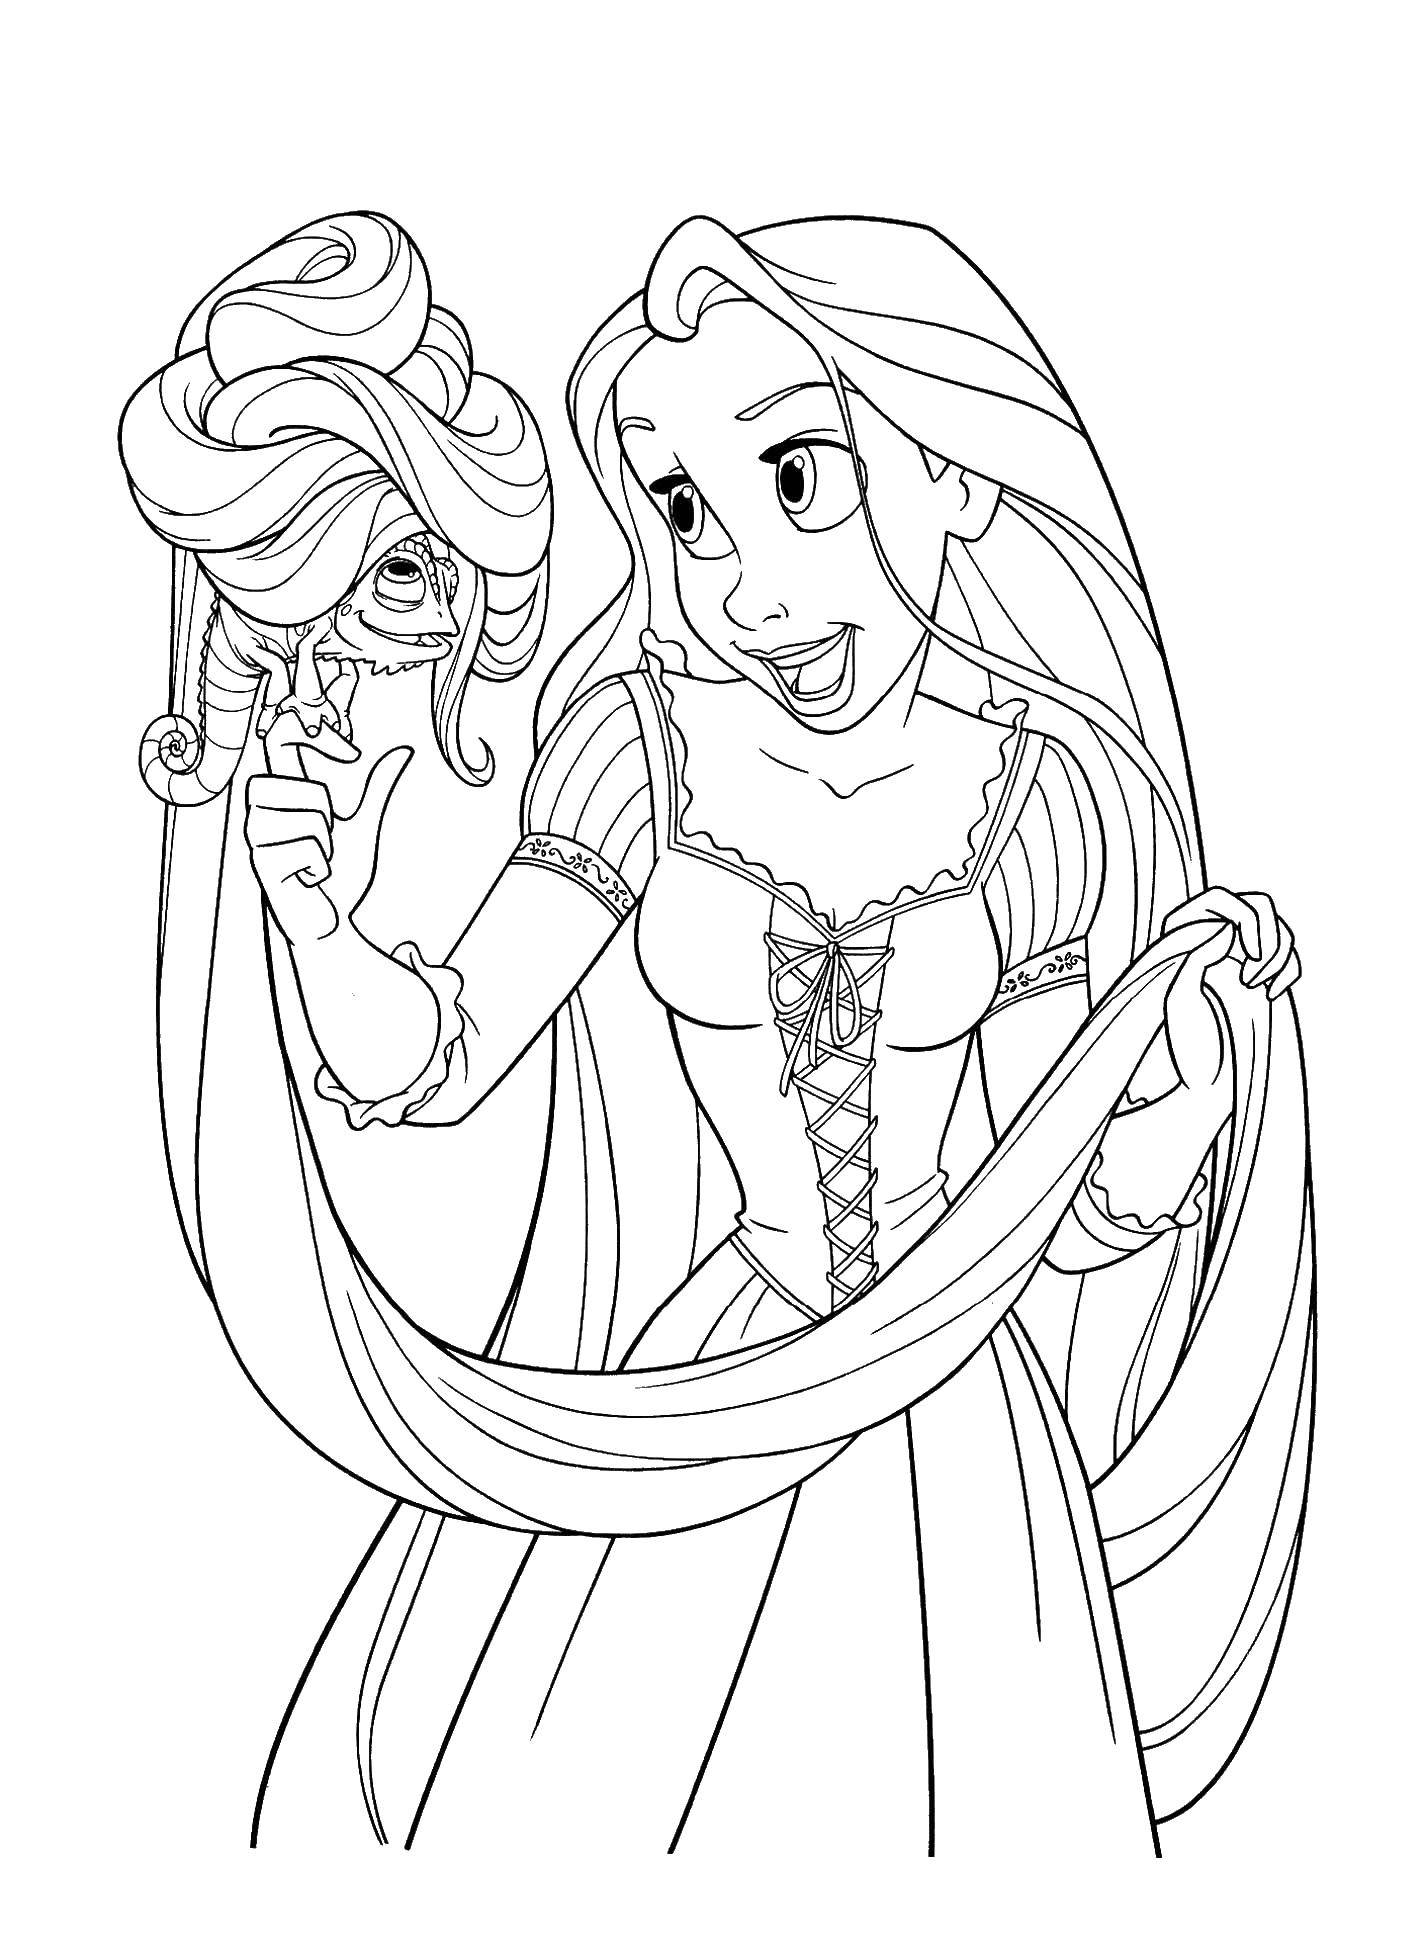 Coloring Rapunzel tangled and lizard. Category coloring pages Rapunzel tangled. Tags:  Rapunzel , a tangled tale.